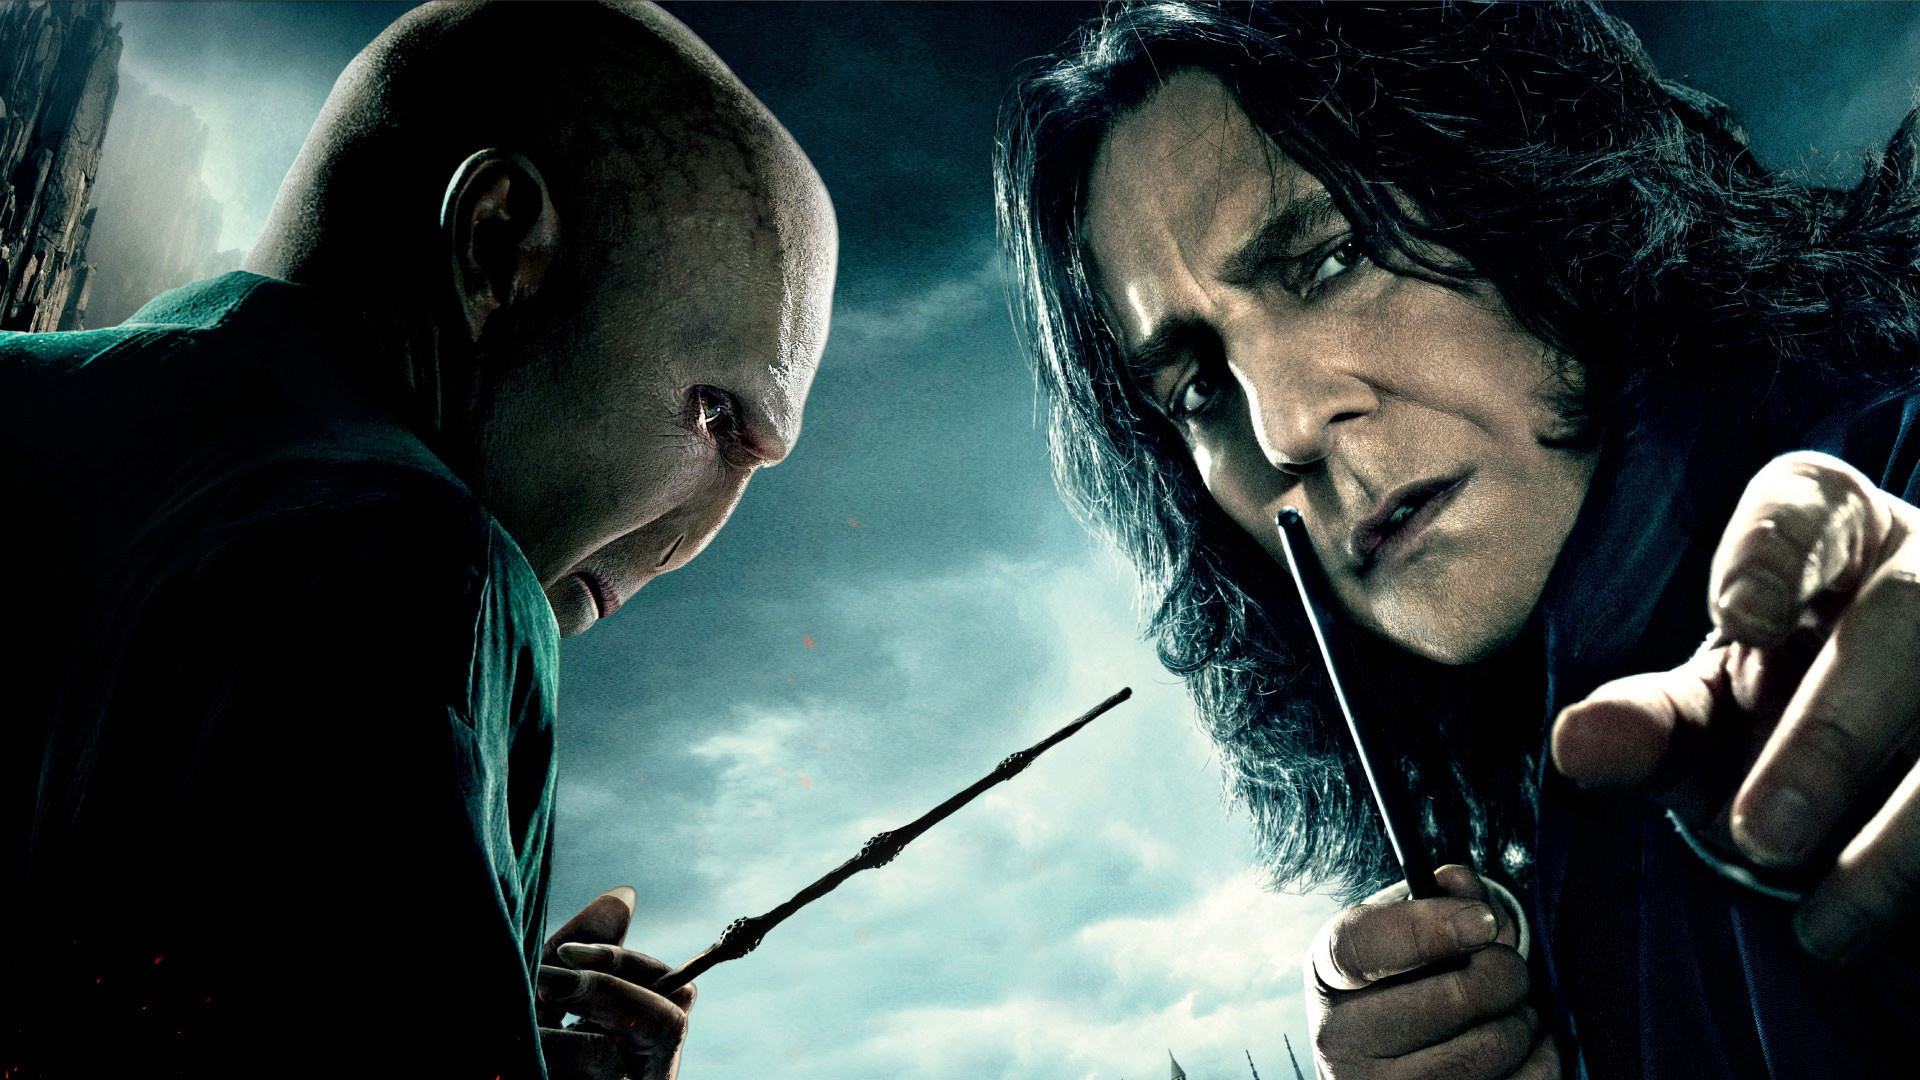 severus snape, harry potter, movie, harry potter and the deathly hallows: part 1, alan rickman, lord voldemort